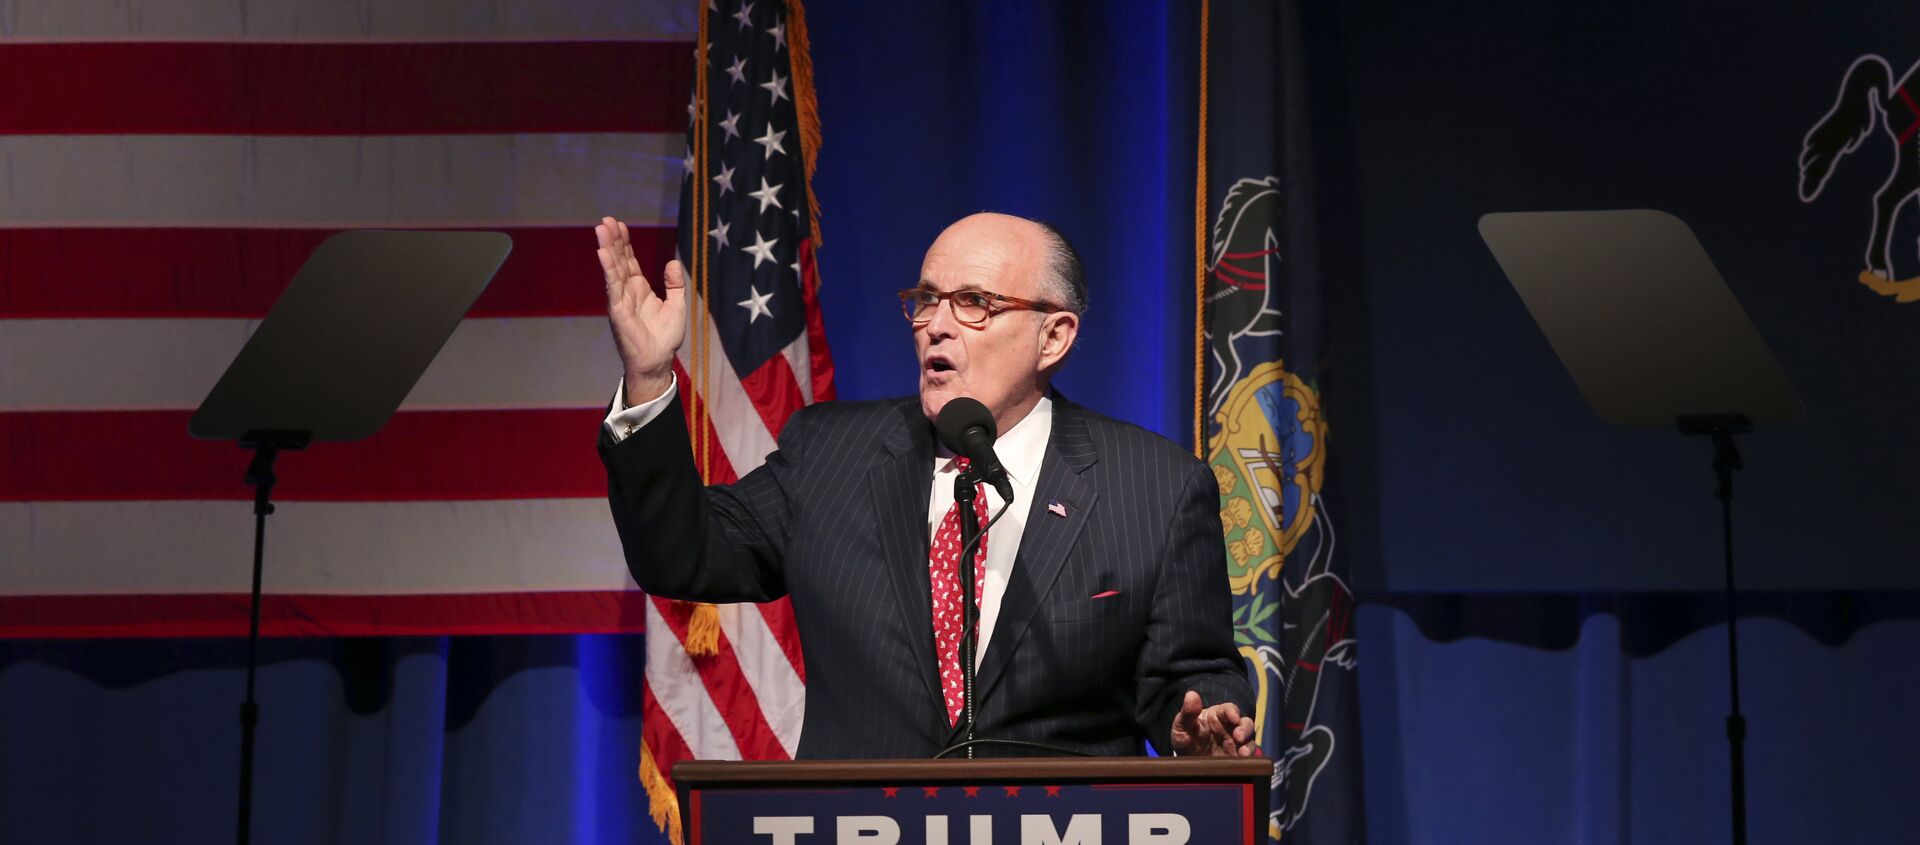 Former New York City Mayor Rudy Giuliani addresses a gathering at a campaign rally for Republican presidential candidate Donald Trump Monday, Nov. 7, 2016, in Scranton, Pa - Sputnik International, 1920, 08.03.2020